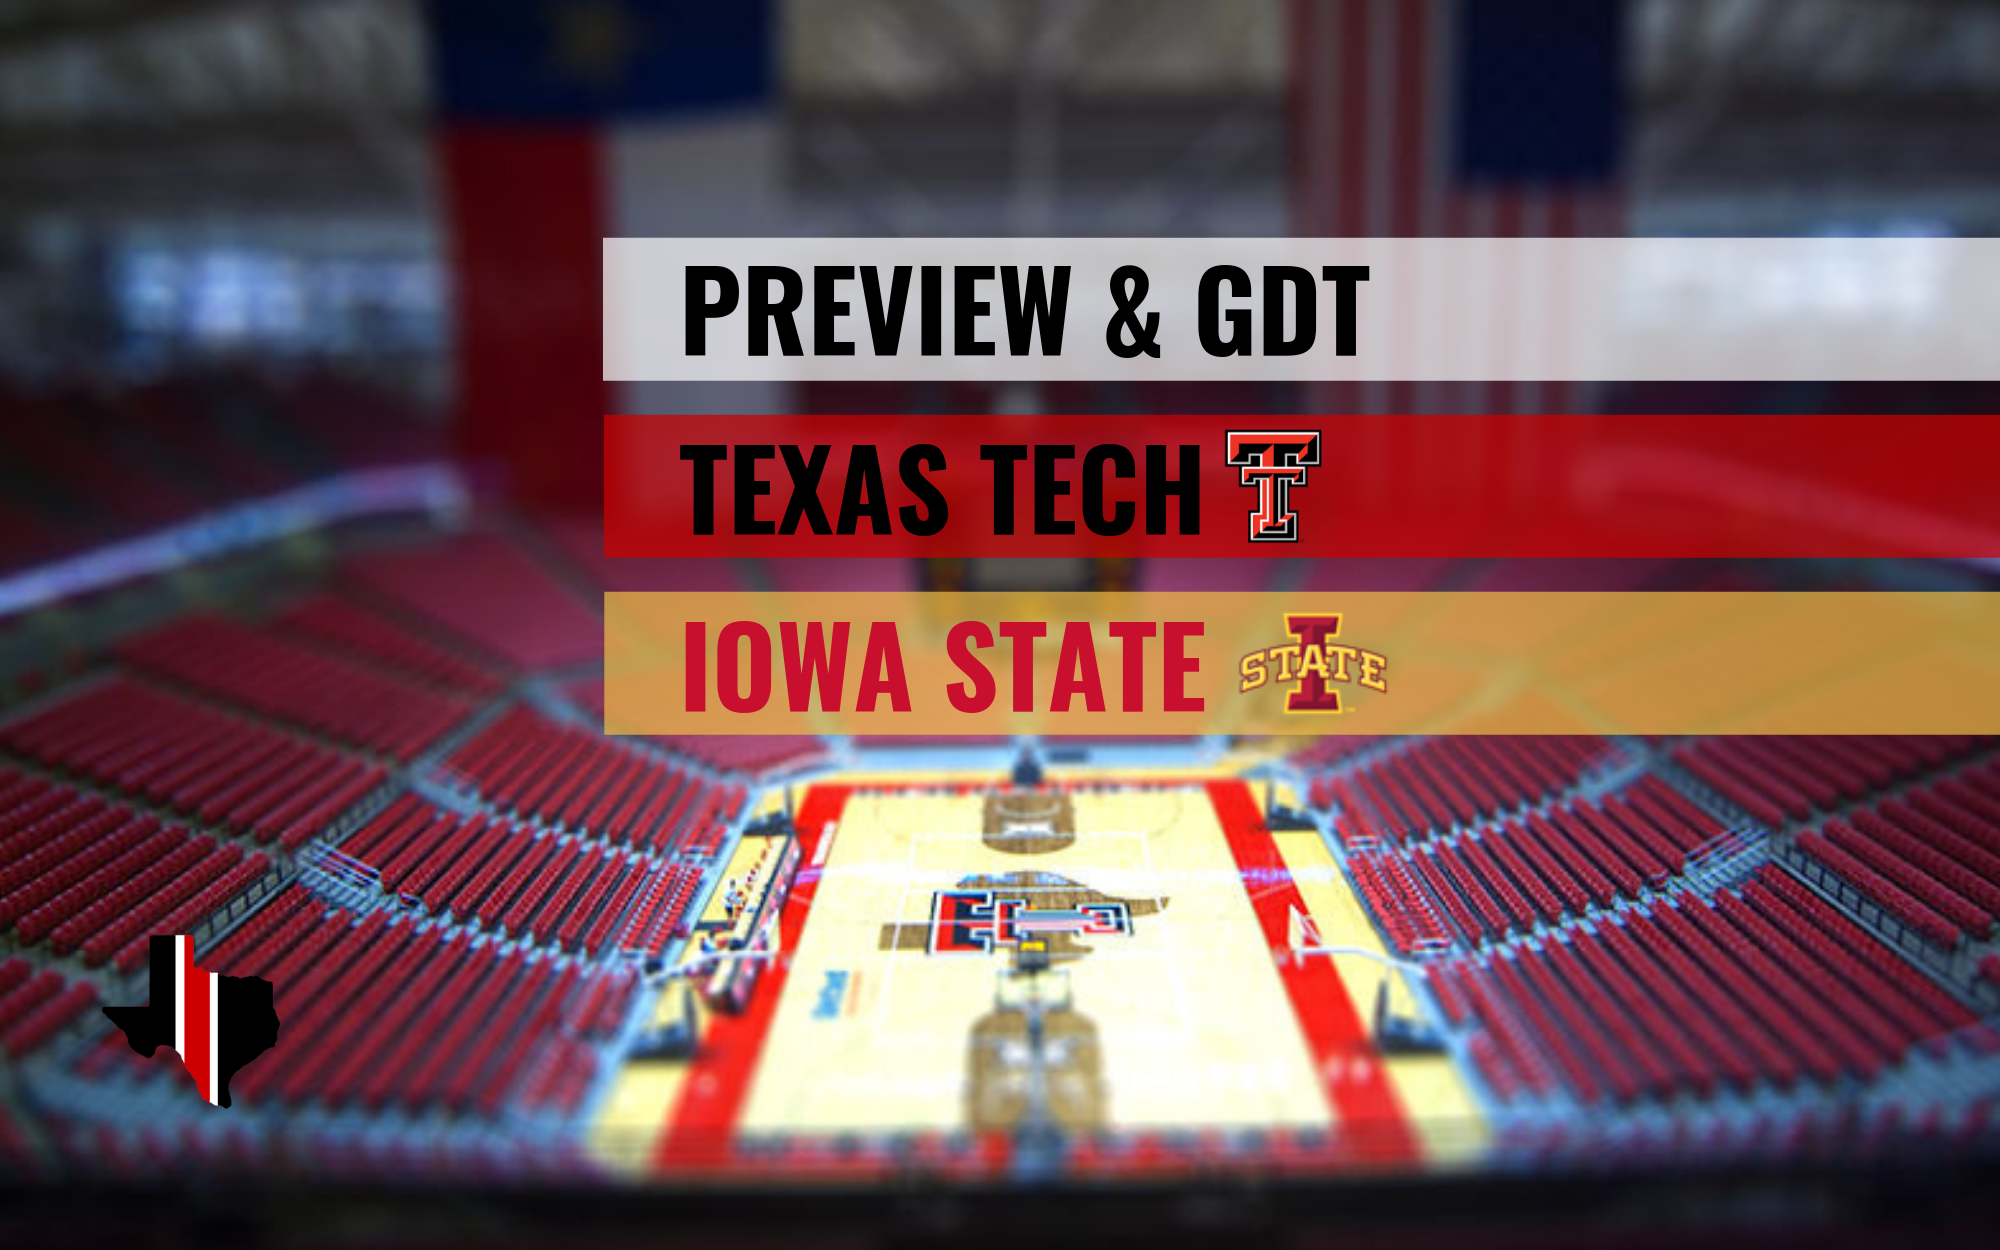 Preview & GDT: Texas Tech vs. Iowa State